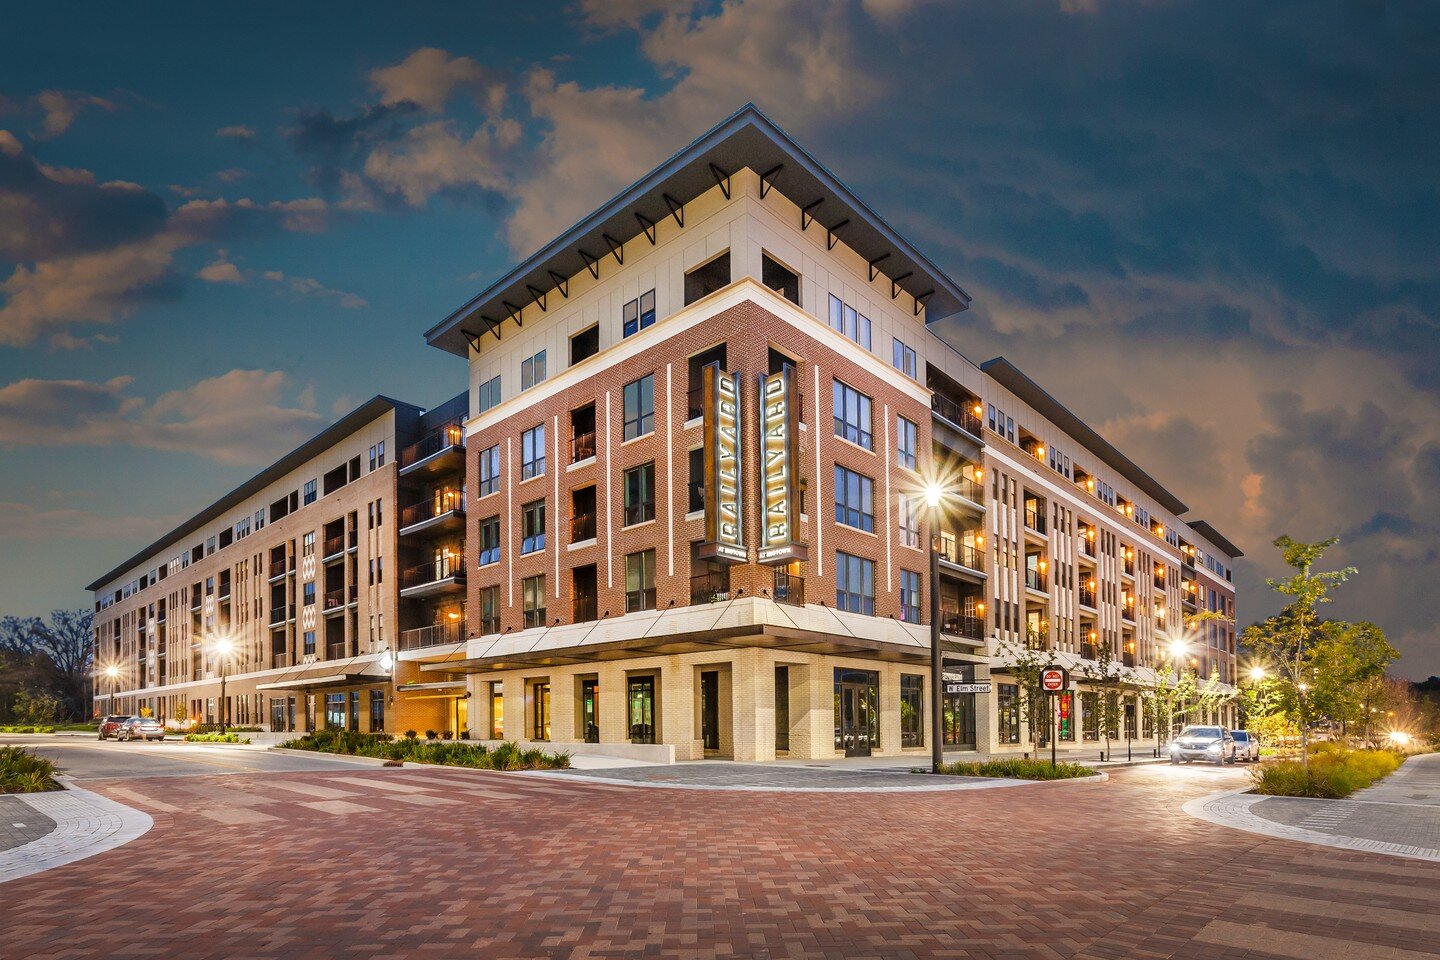 Friday Feature: The Railyard at Midtown

Location: Carmel, IN
Scale: 406,832 SF
Program: Mixed-Use / Multi-Family Apartments / Amenity / Retail / Parking Garage
Team: @barrettandstokely, Dillon Construction Group, Lynch Harrison and Brumleve Inc., @k